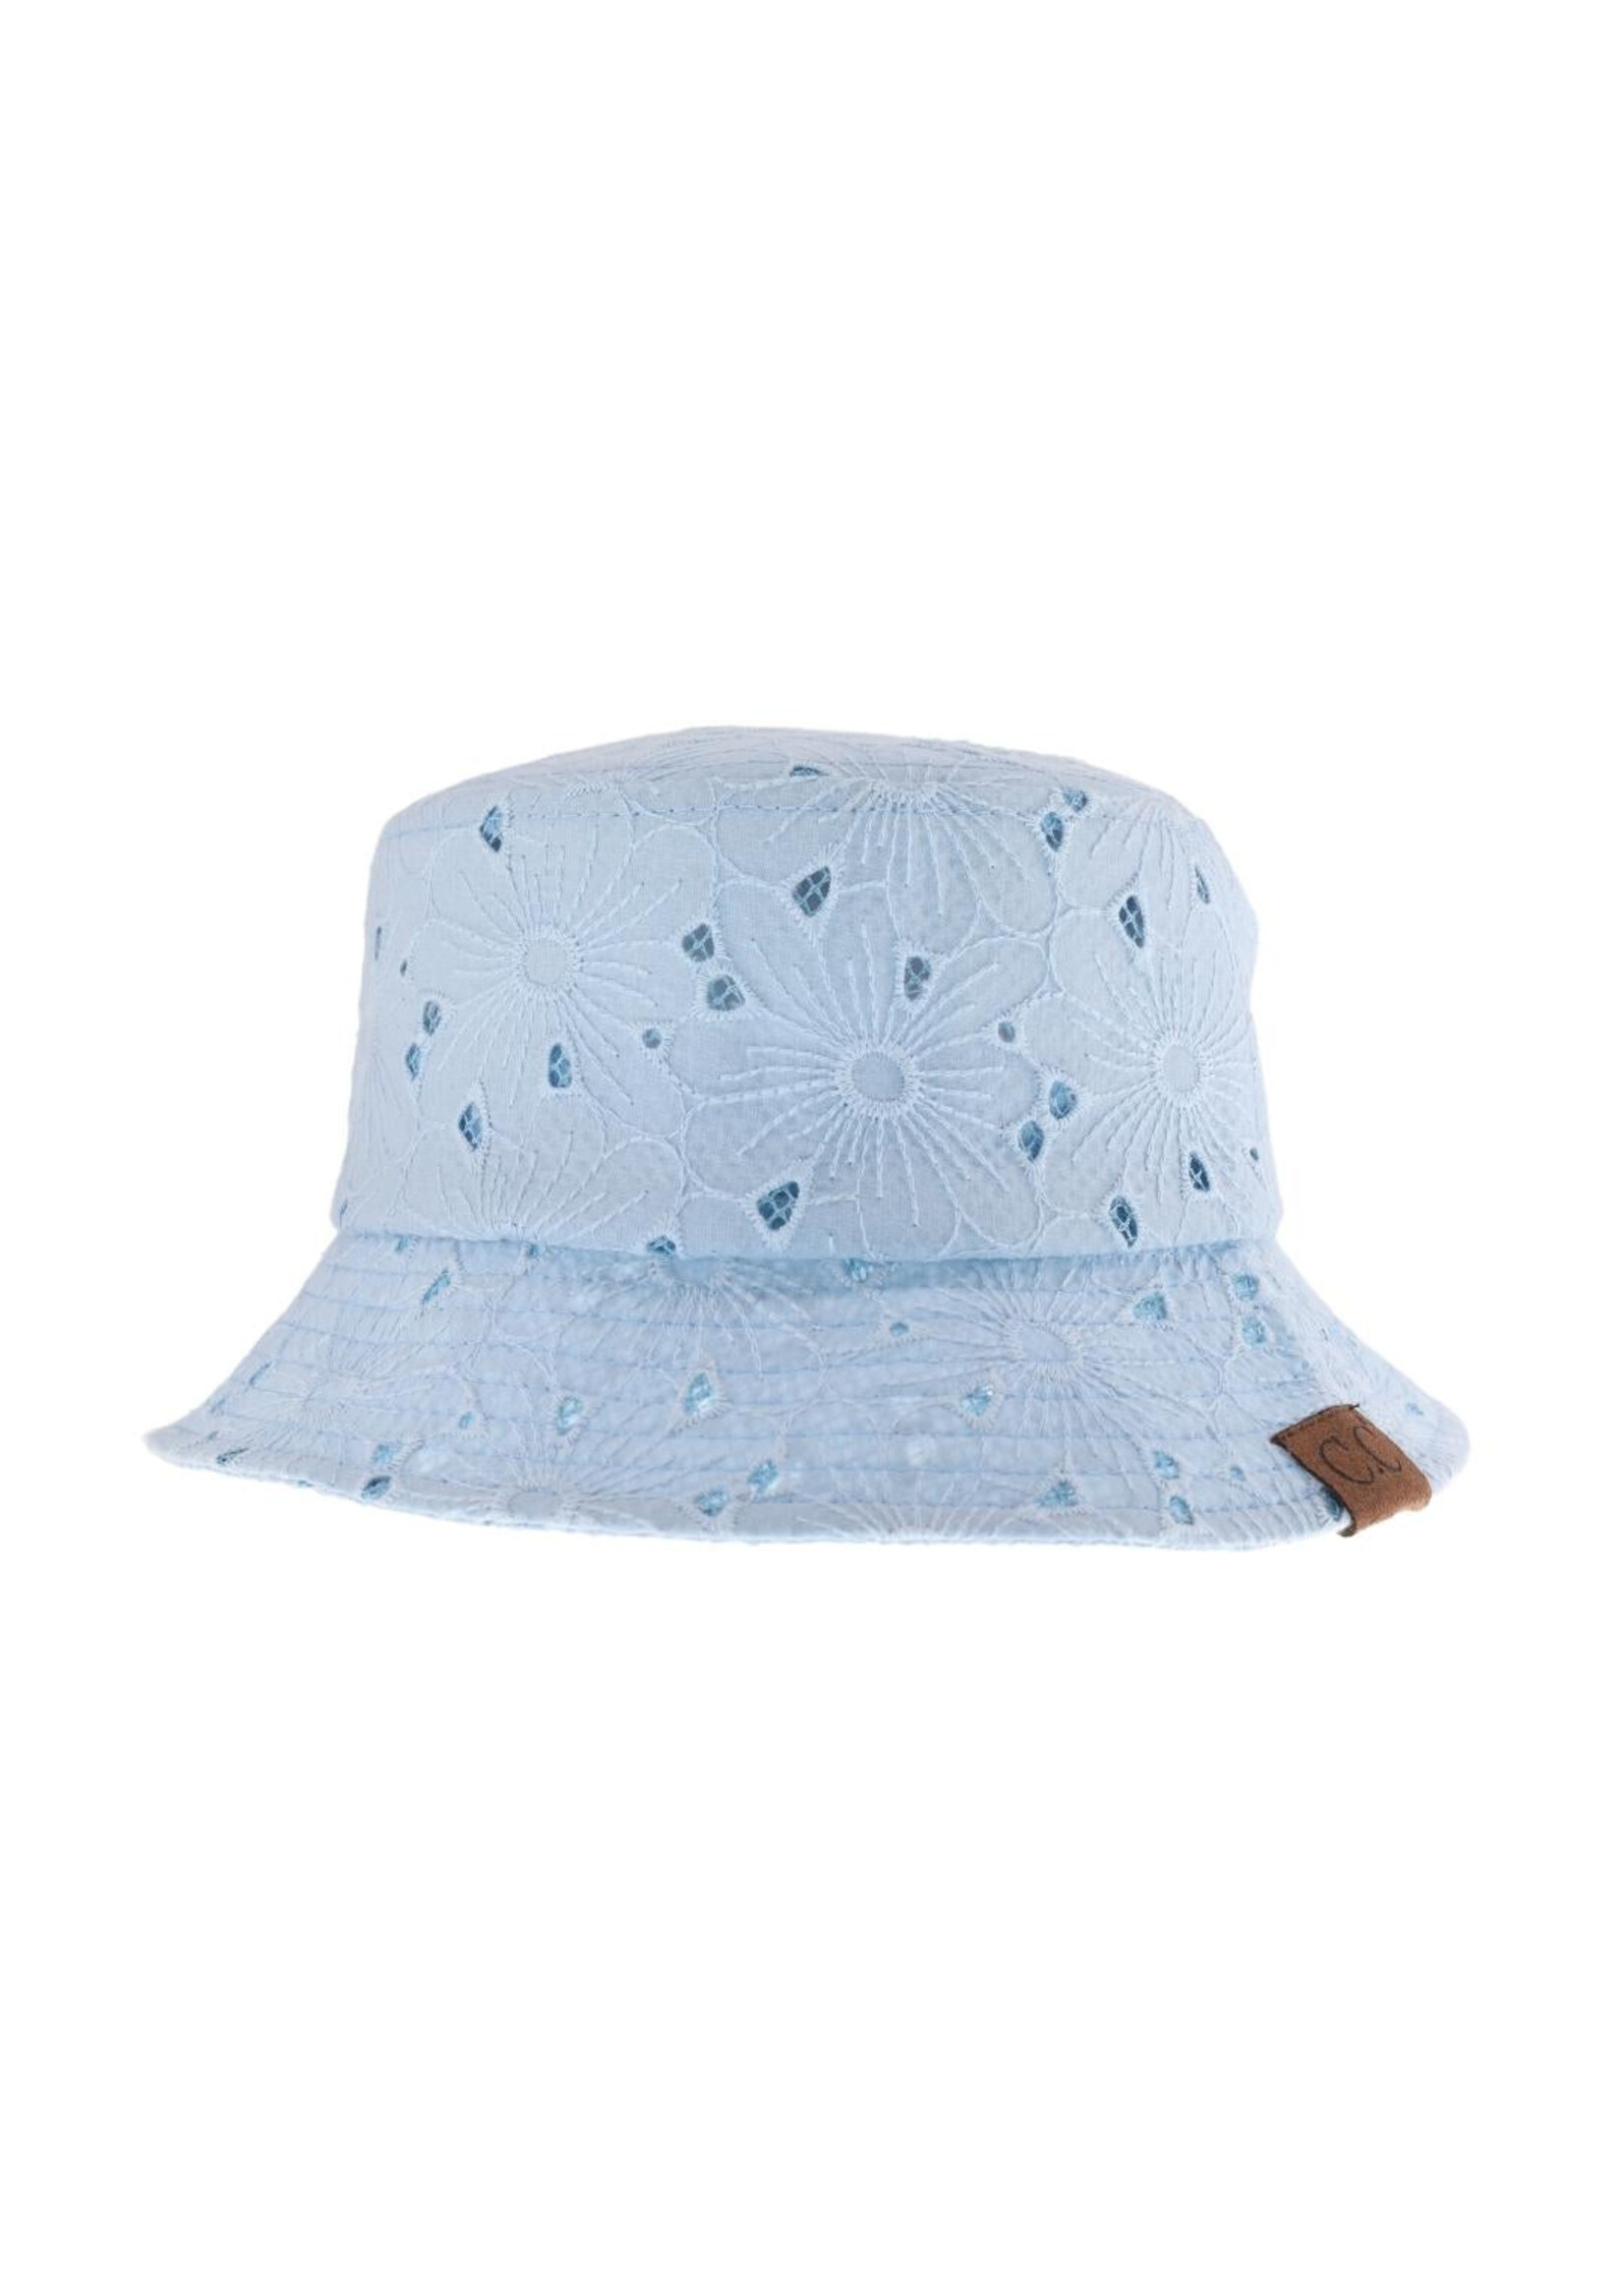 CCB EMBROIDERED FLORAL COTTON EYELET BUCKET HAT